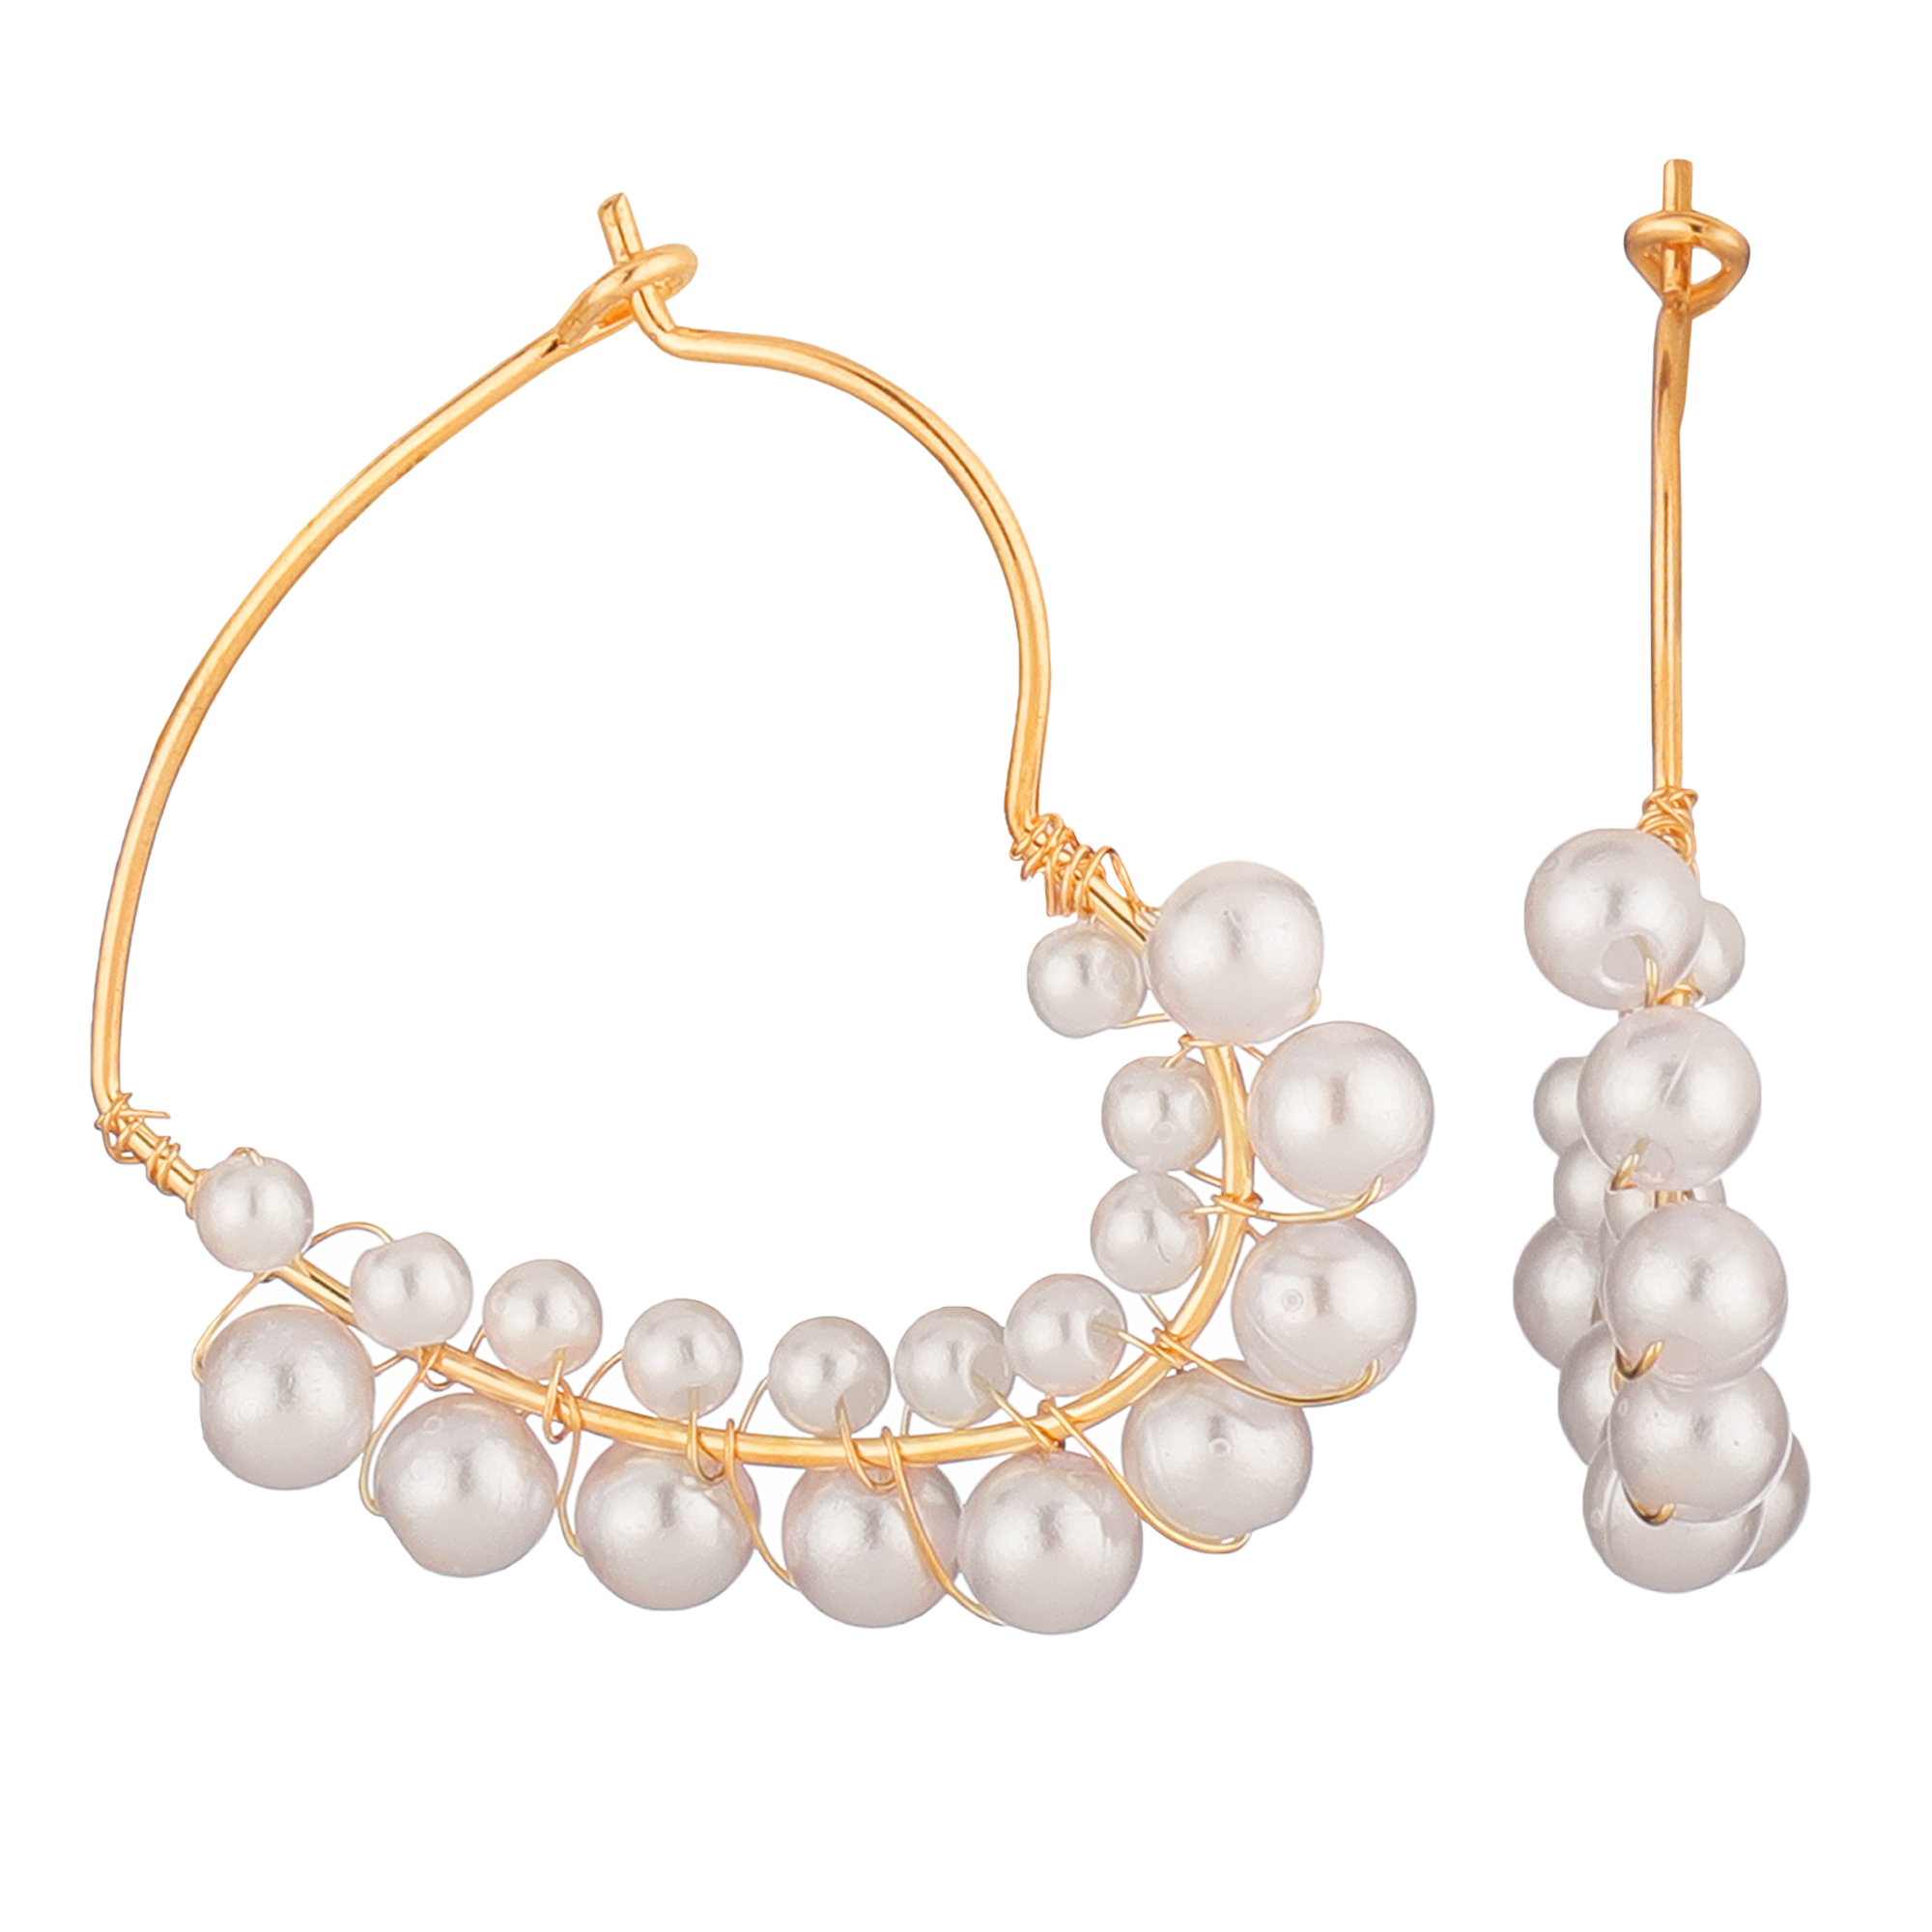 Gold Plated Embellished With Pearls Drop Earrings For Women and Girls